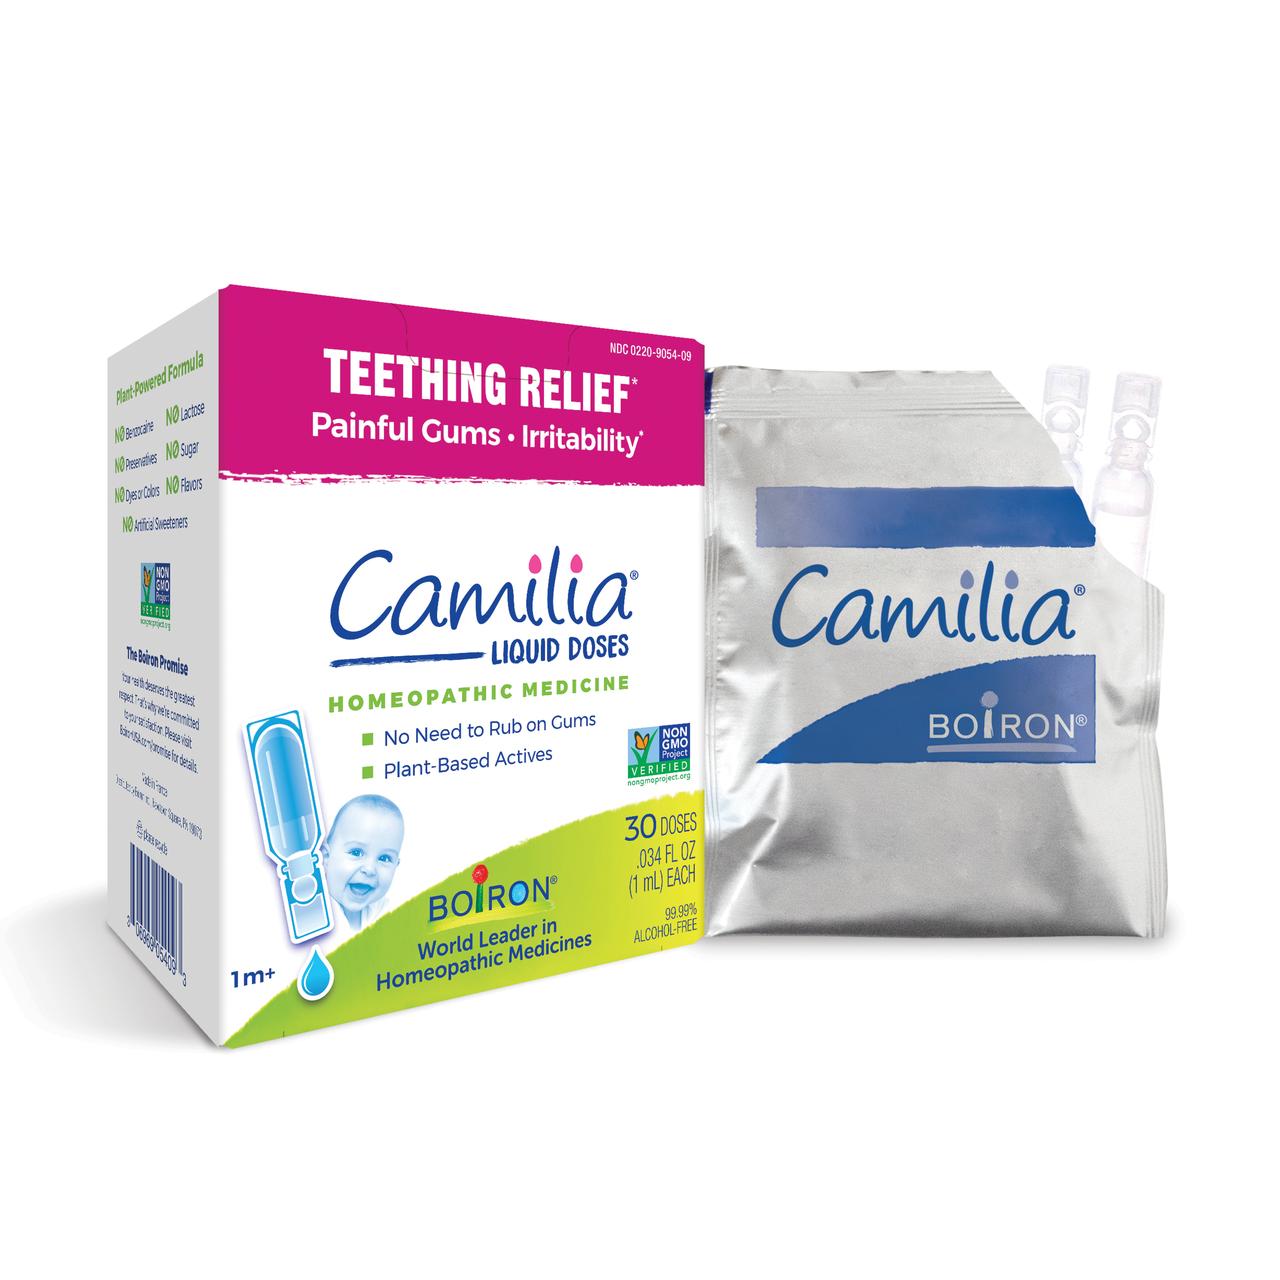 Boiron Camilia Teething Drops for Daytime and Nighttime Relief of Painful or Swollen Gums and Irritability in Babies, Irritability, 30 Single Liquid Doses - image 3 of 11